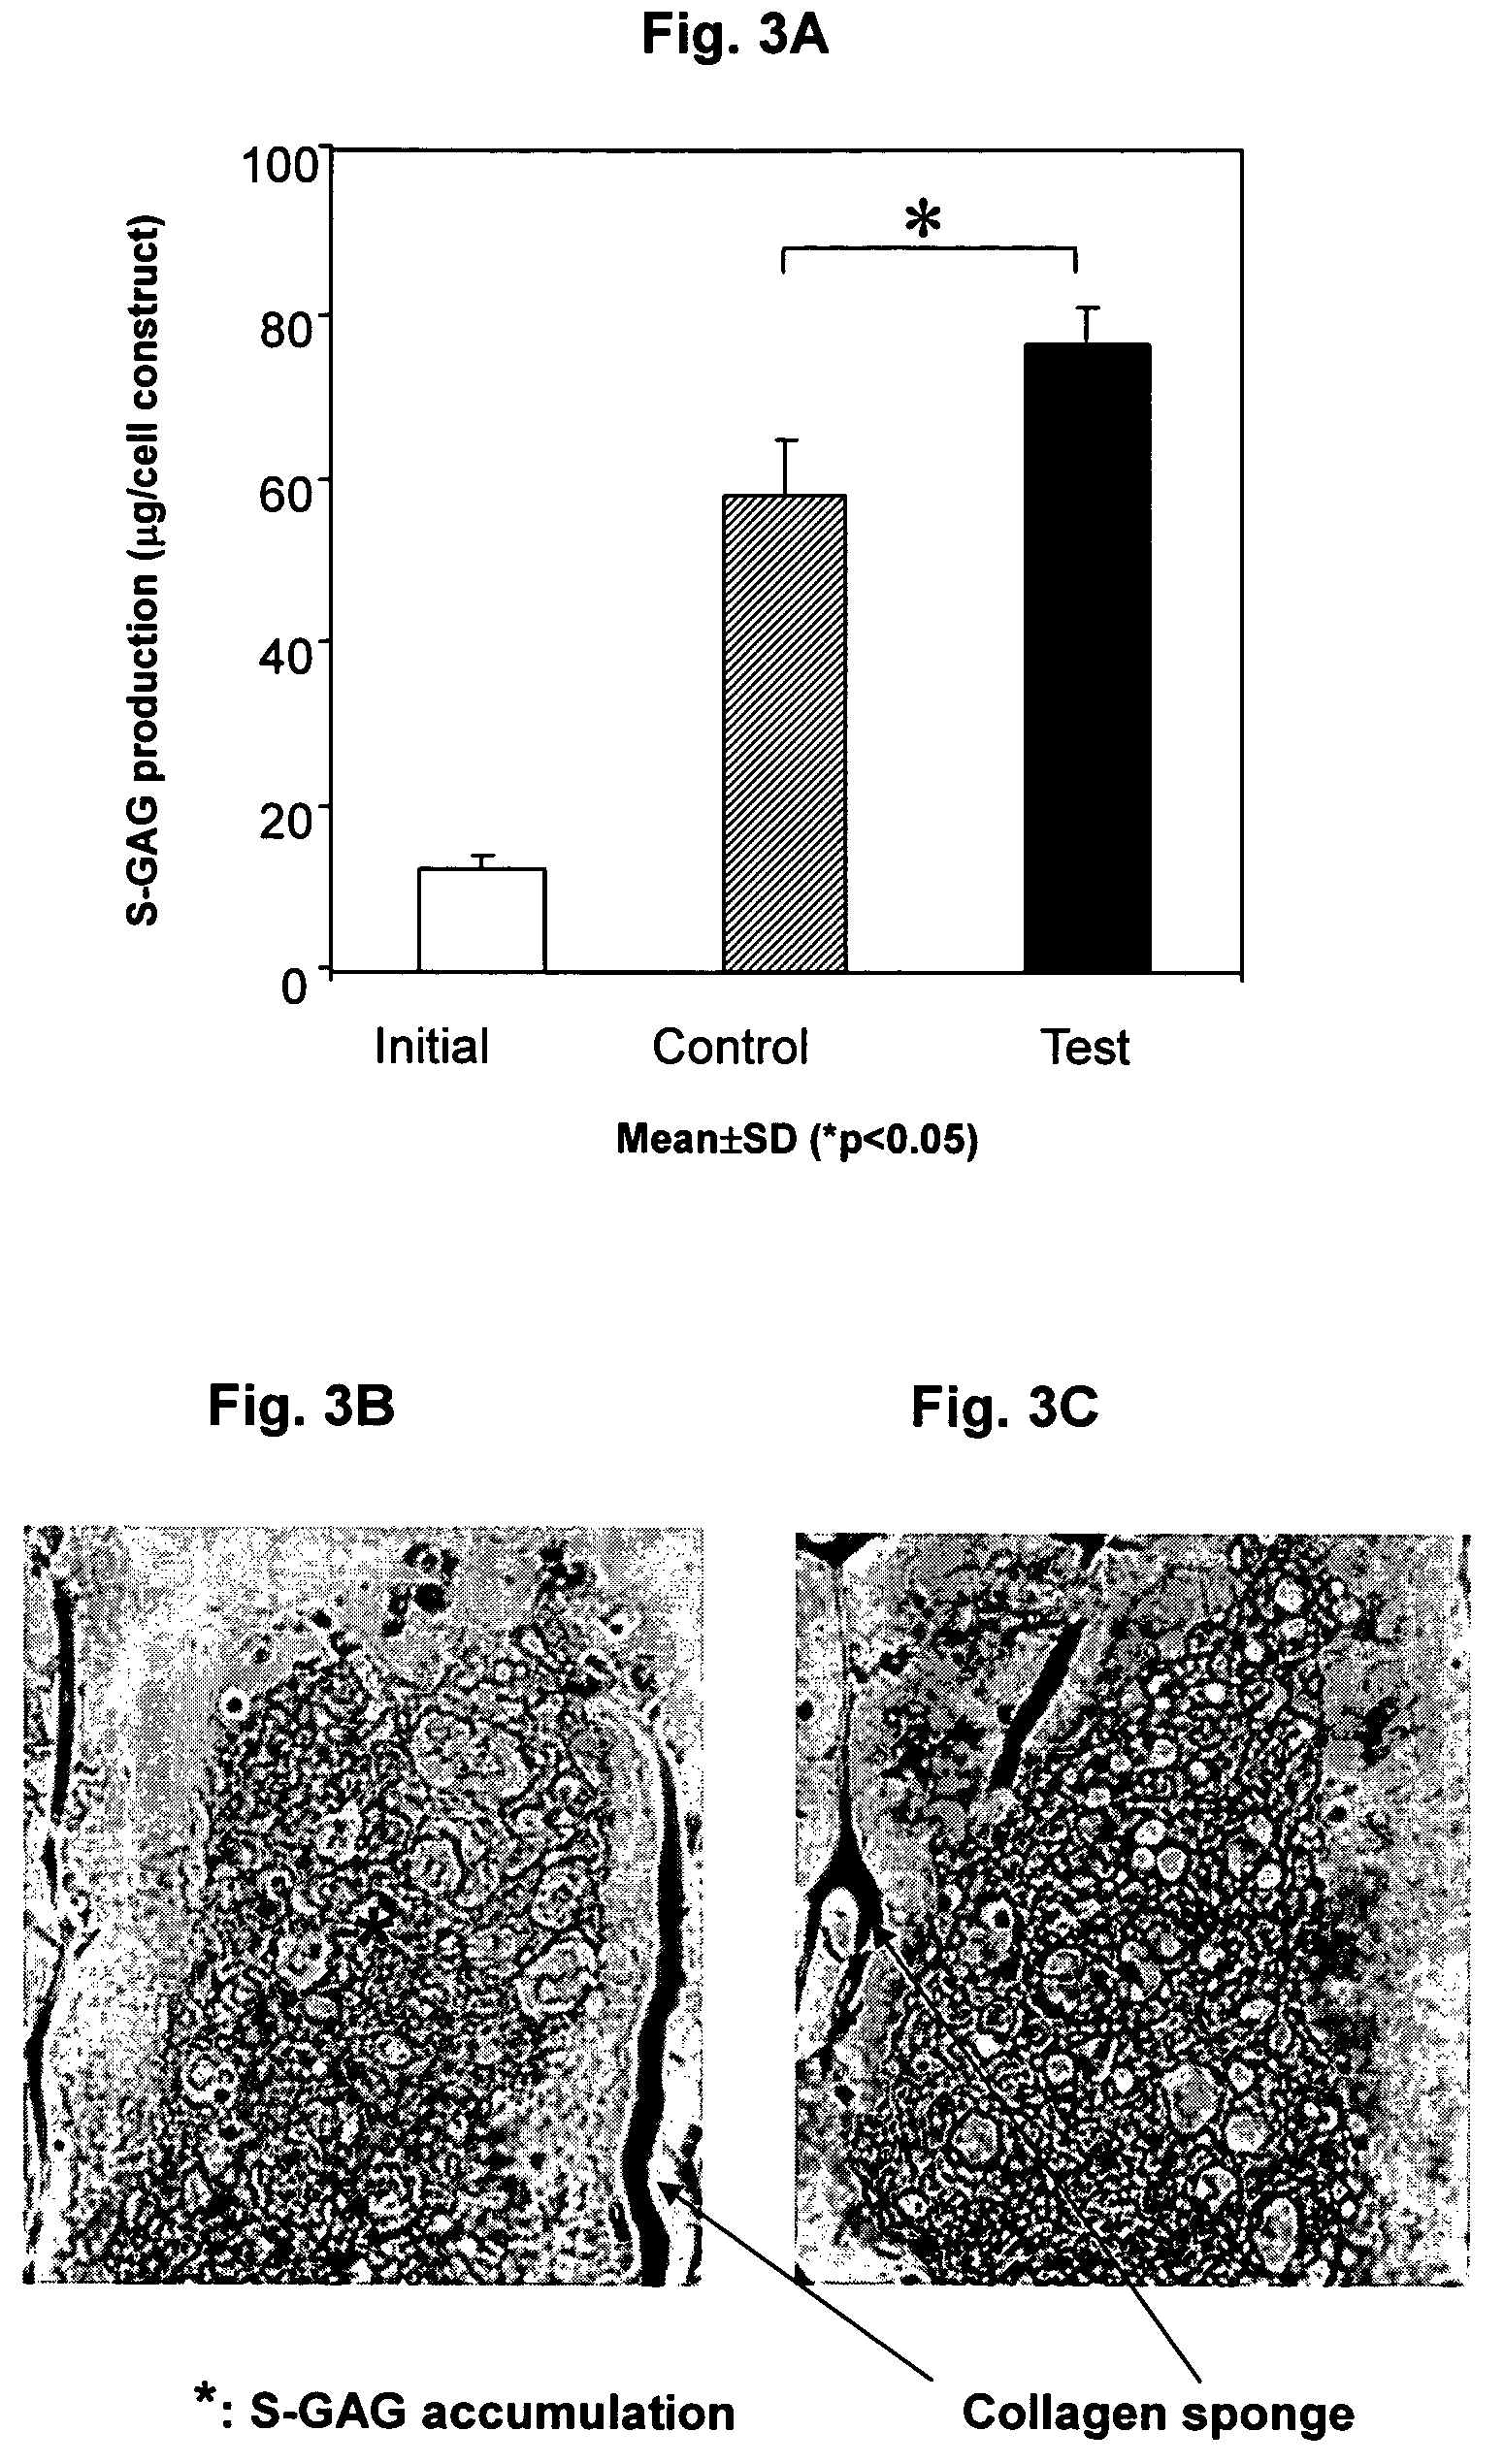 Method for preparing and implanting a cartilage construct to treat cartilage lesions